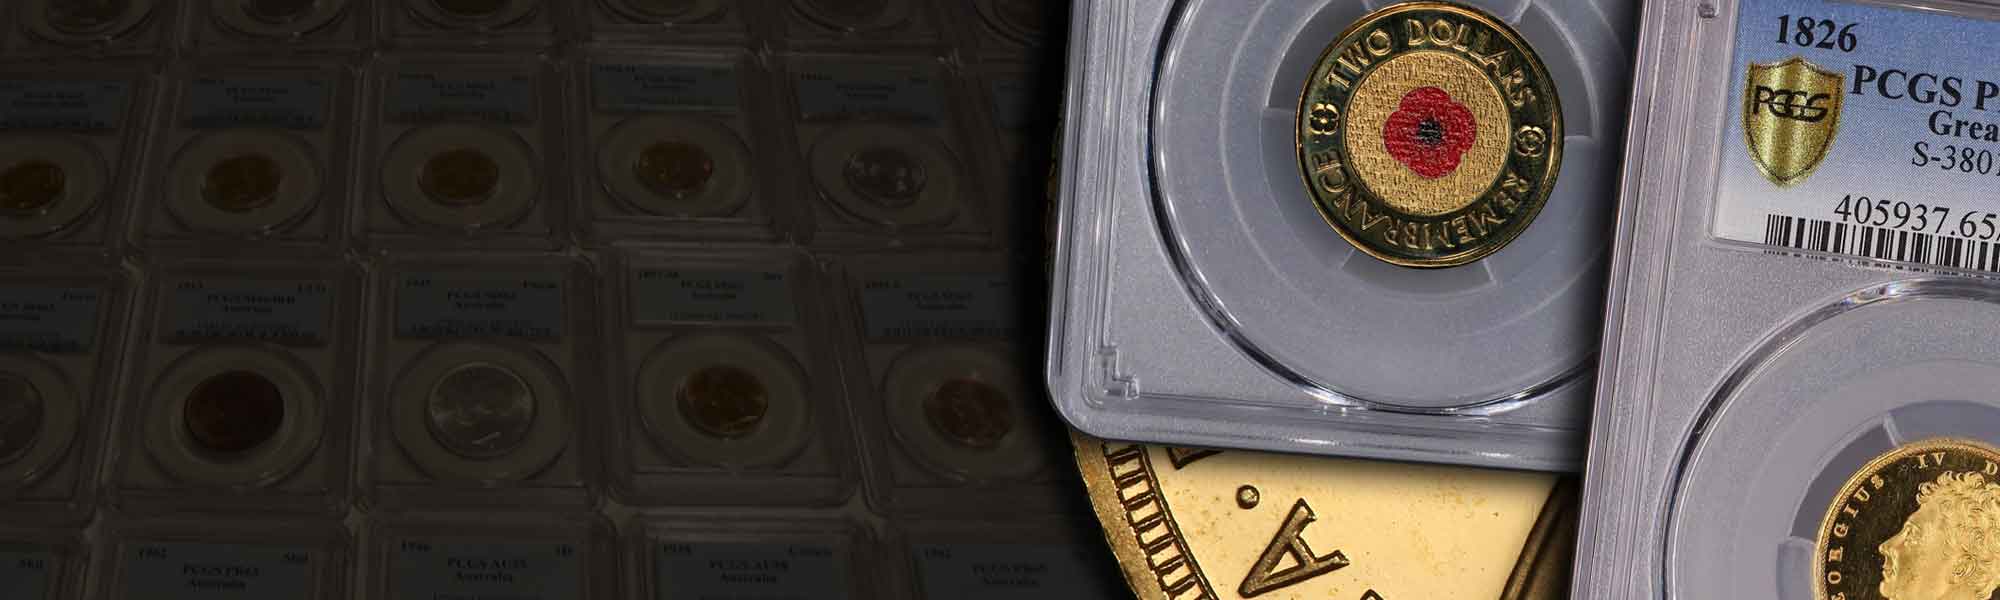 The Importance of Coin Grading and Certification for Authentication